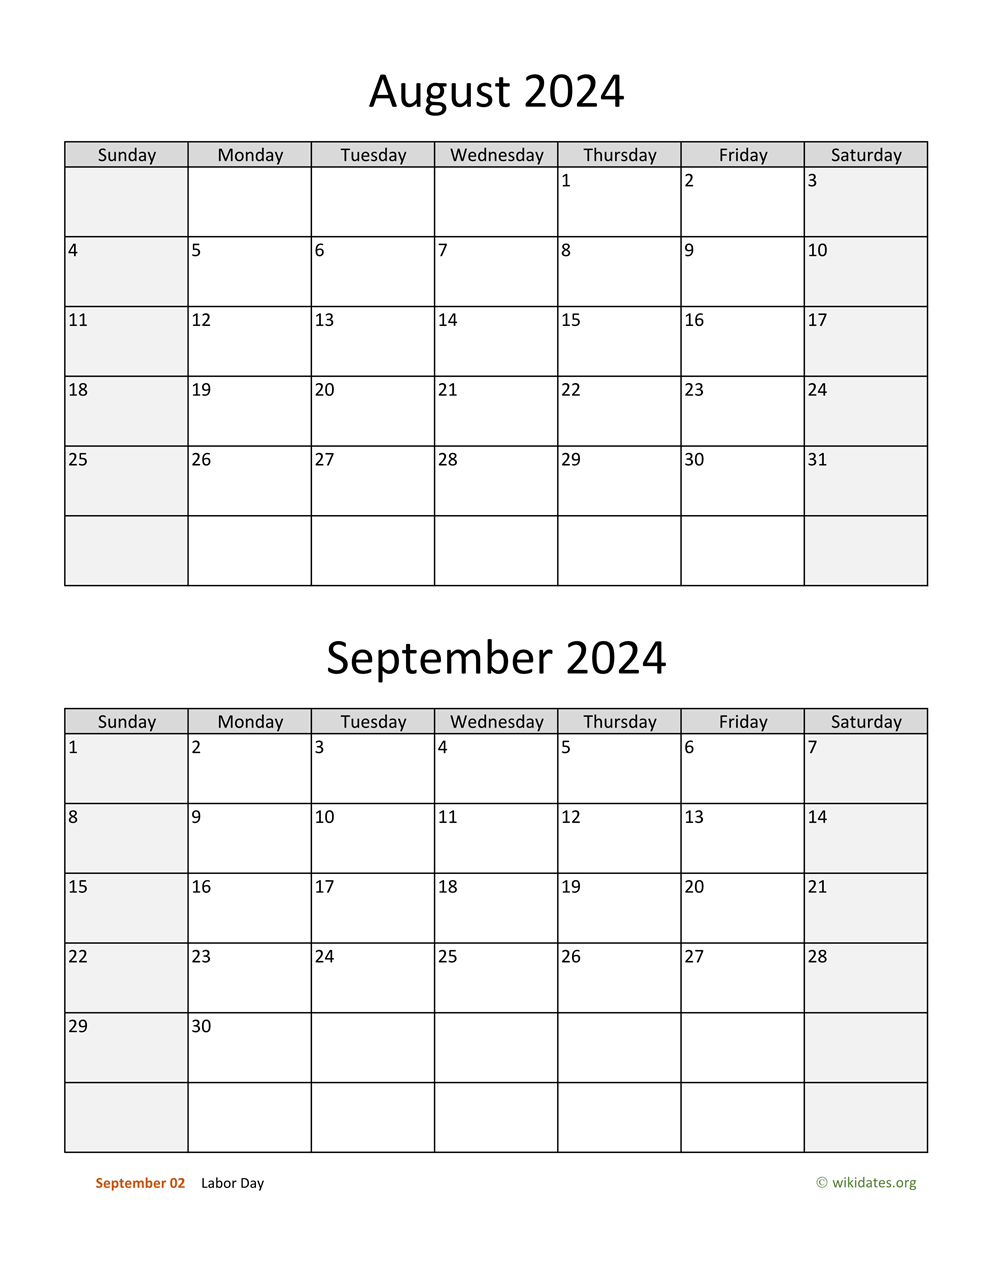 August And September 2024 Calendar | Wikidates for August And September 2024 Calendar Printable